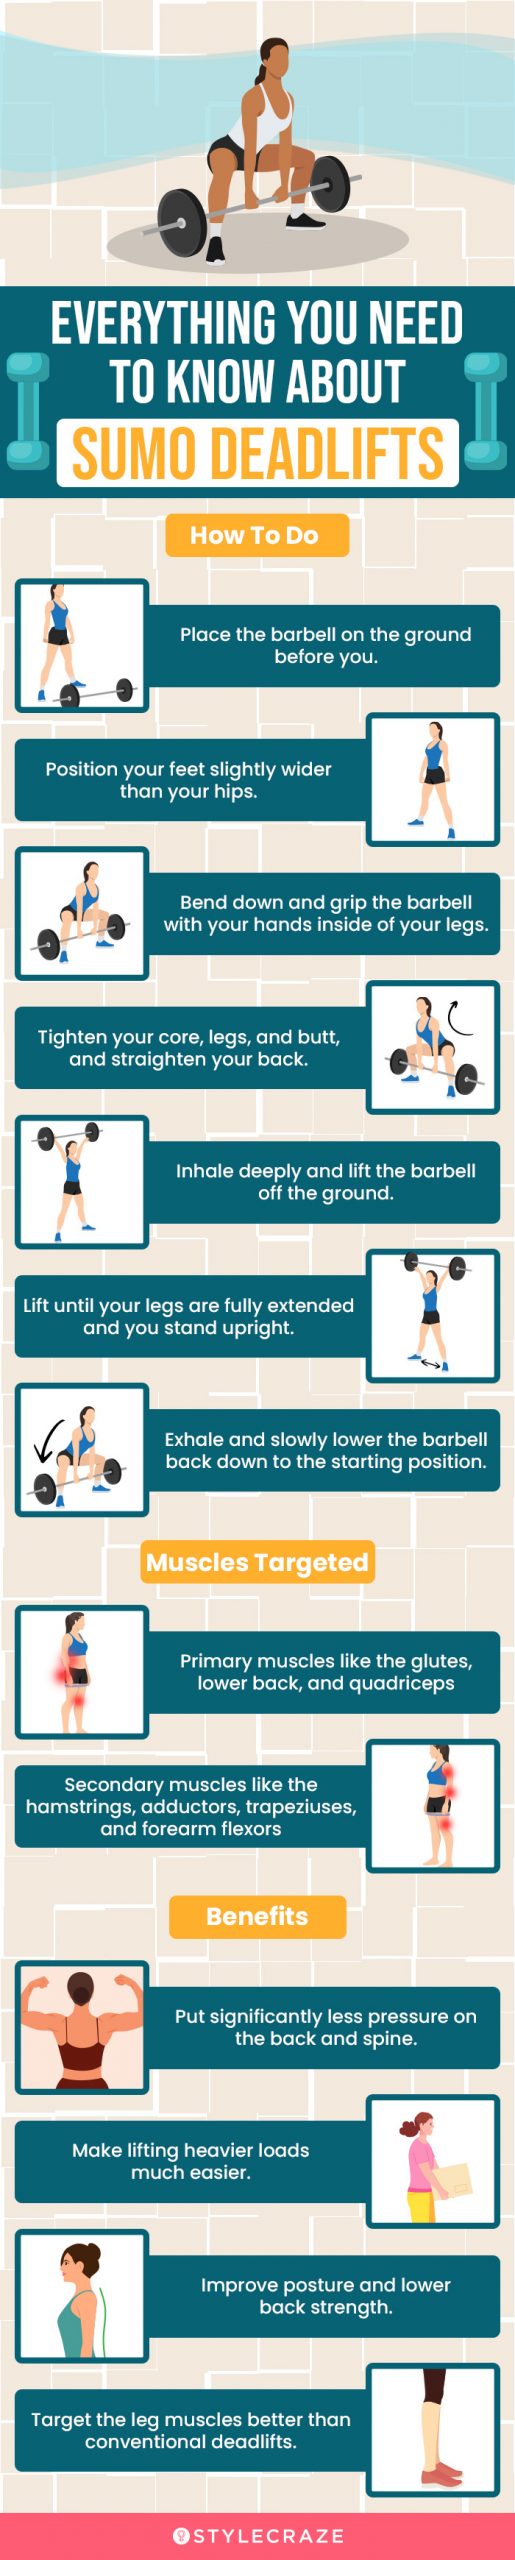 everything you need to know about sumo deadlifts (infographic)